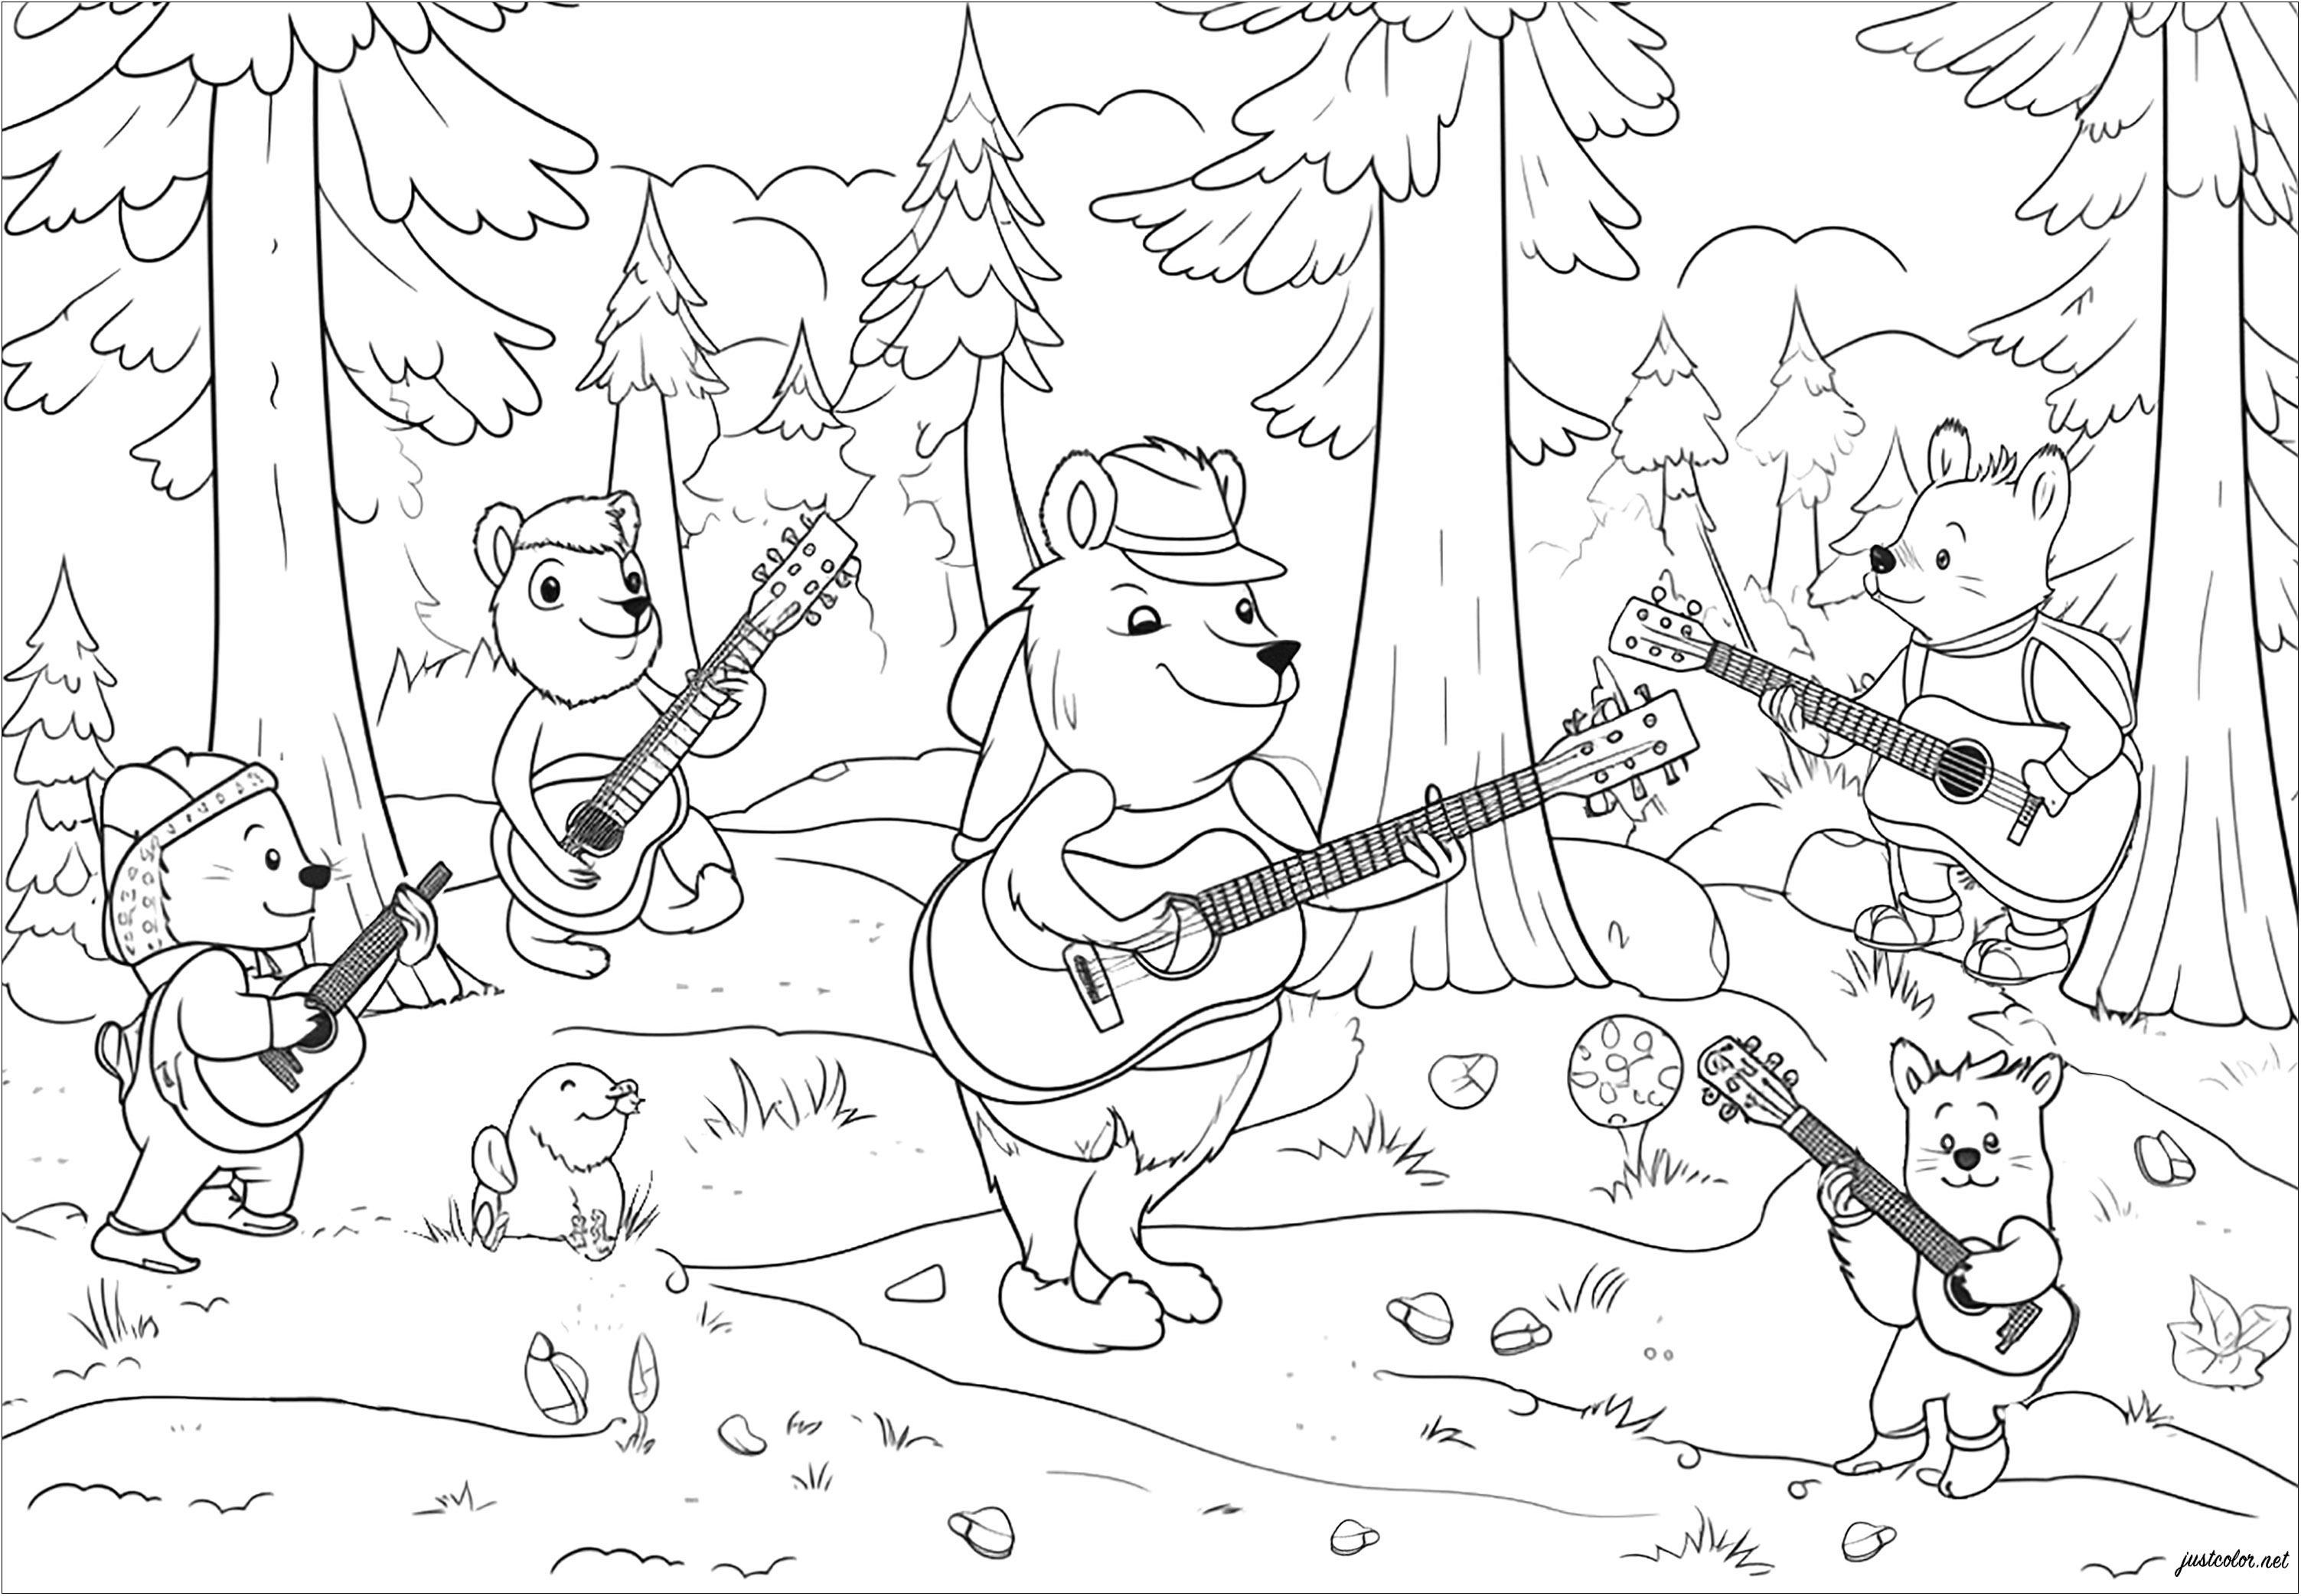 This coloring page is childlike but full of detail, with bears singing in a lovely forest. This coloring page is a real invitation to imagination and creativity. It also encourages us to open up to nature and respect its flora and fauna, Artist : Olivier